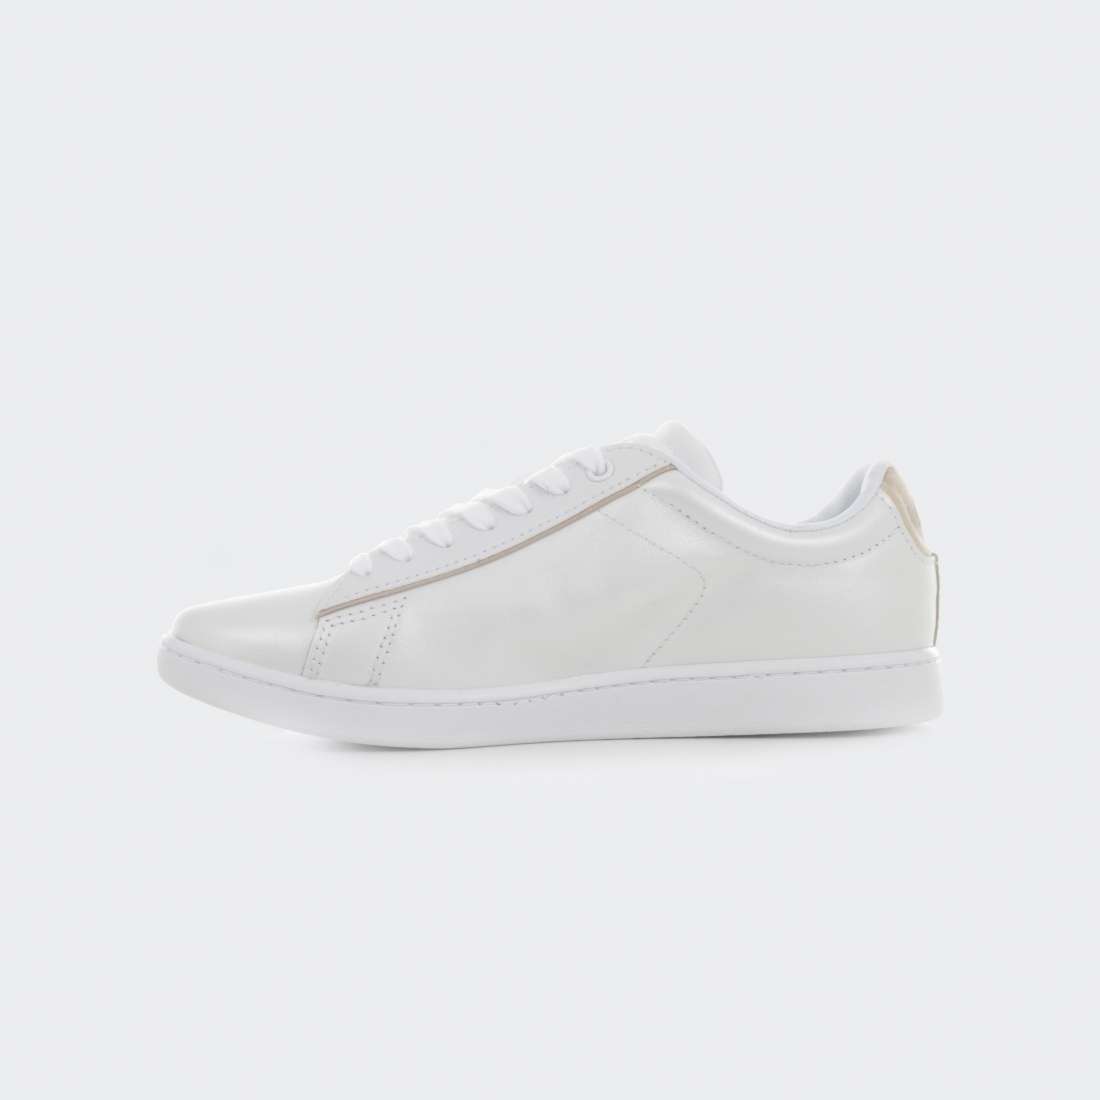 LACOSTE CARNABY EVO SATIN WHITE/GOLD